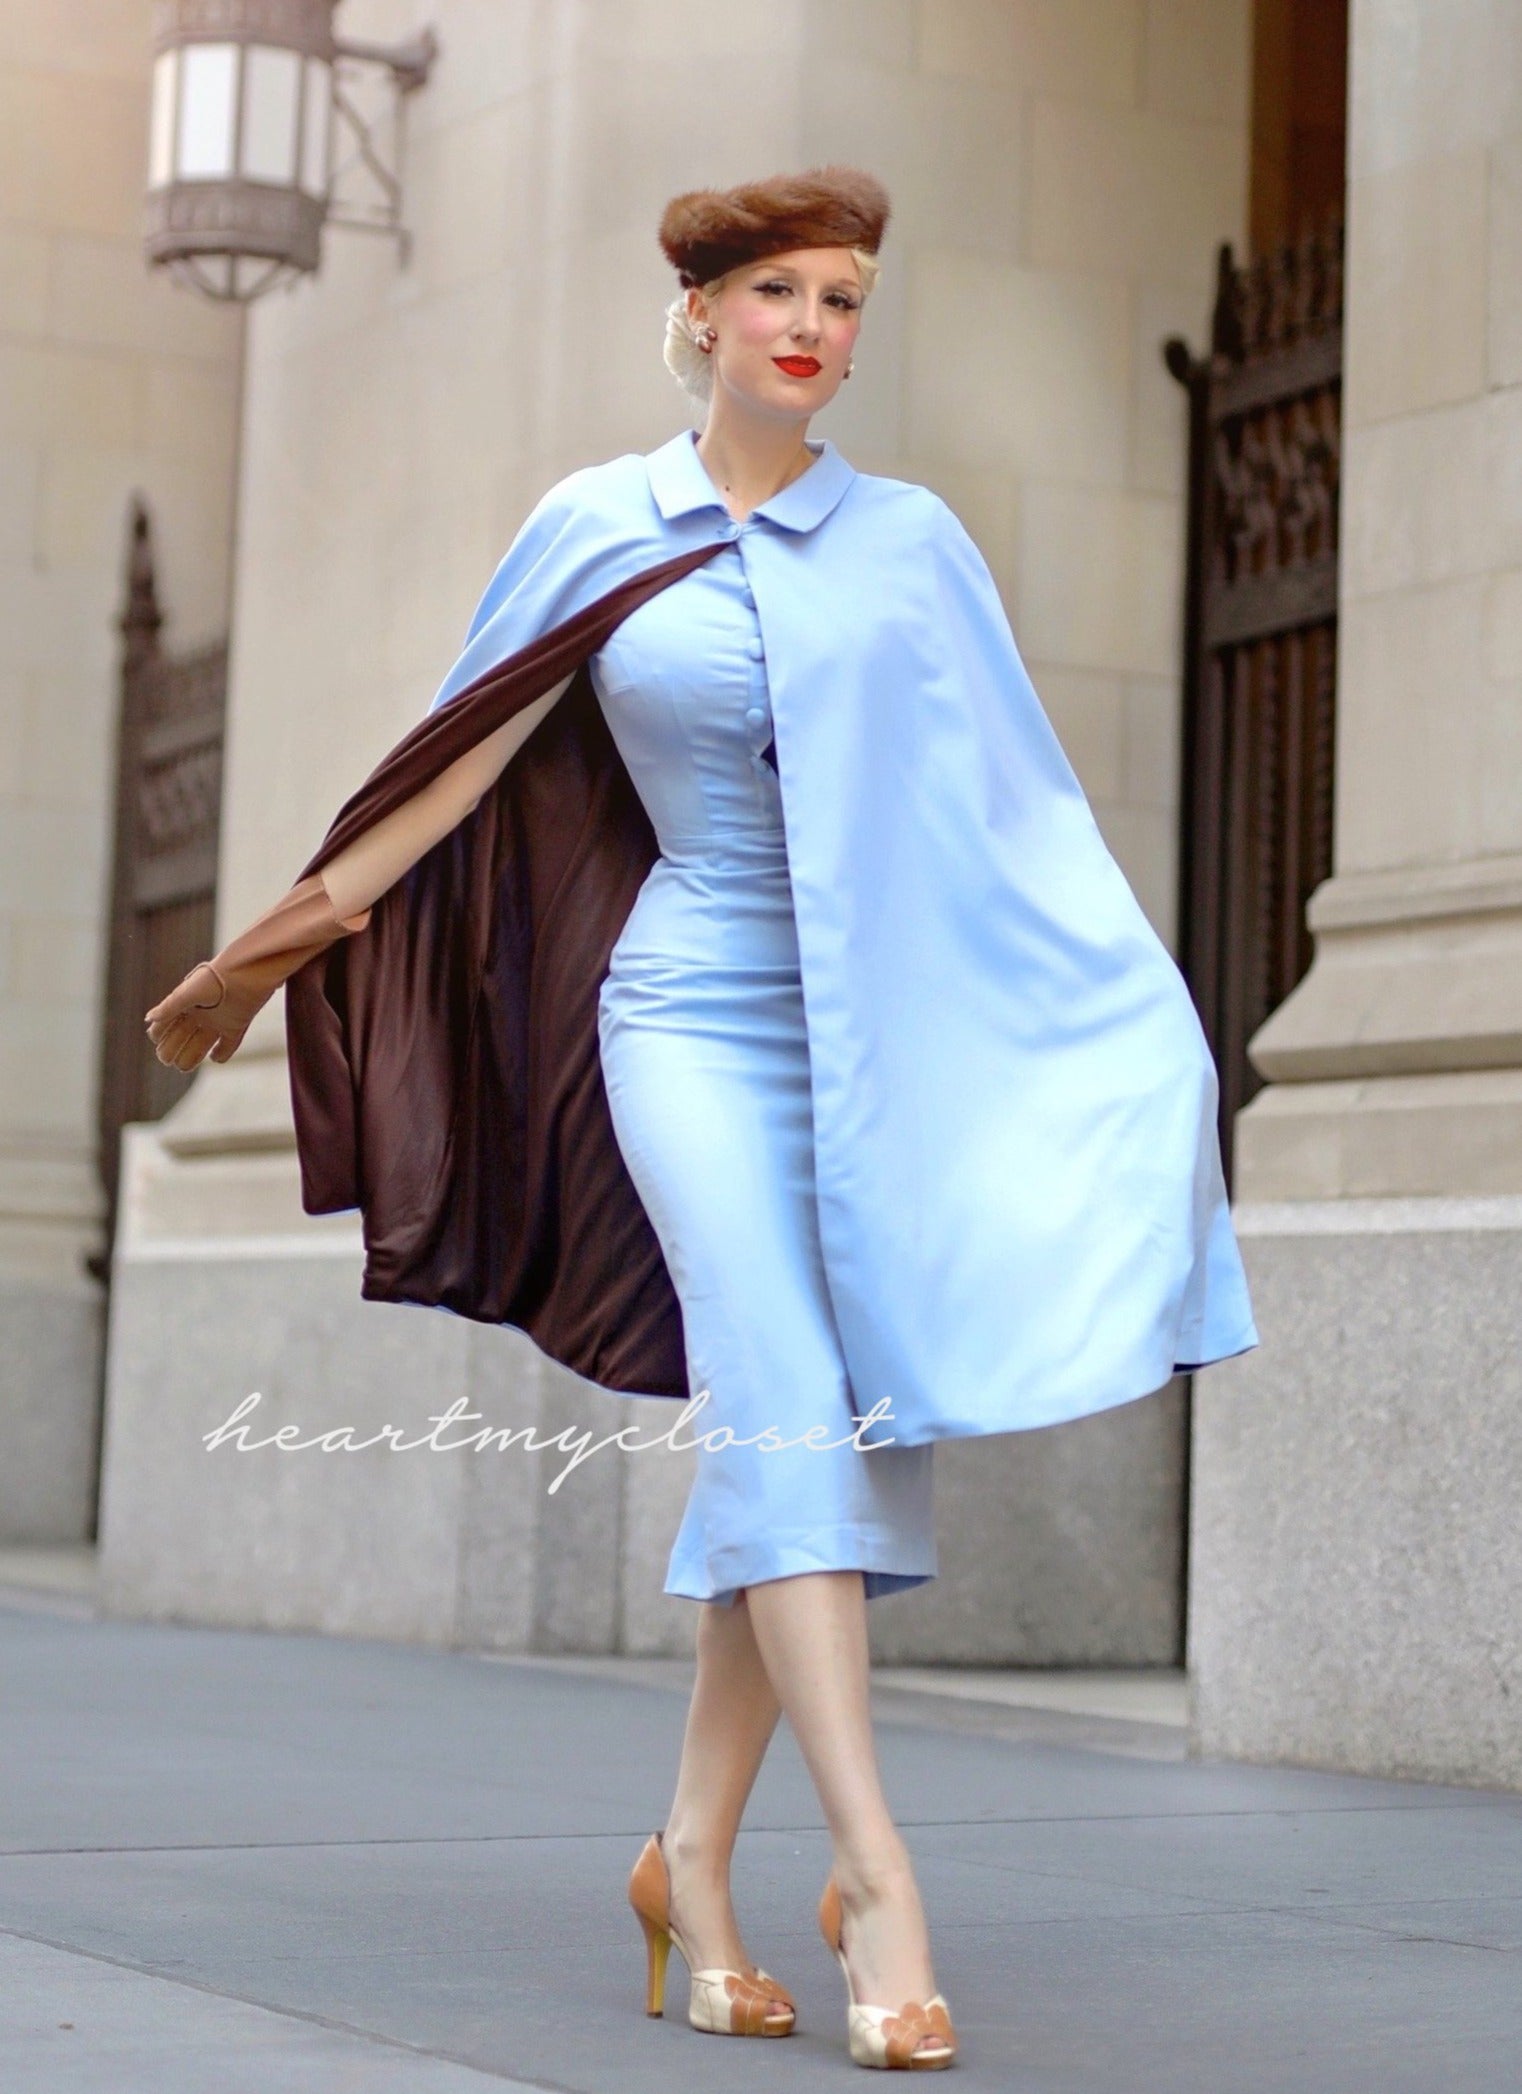 Cape + dress - 50s 60s white pencil dress with matching cape – heartmycloset